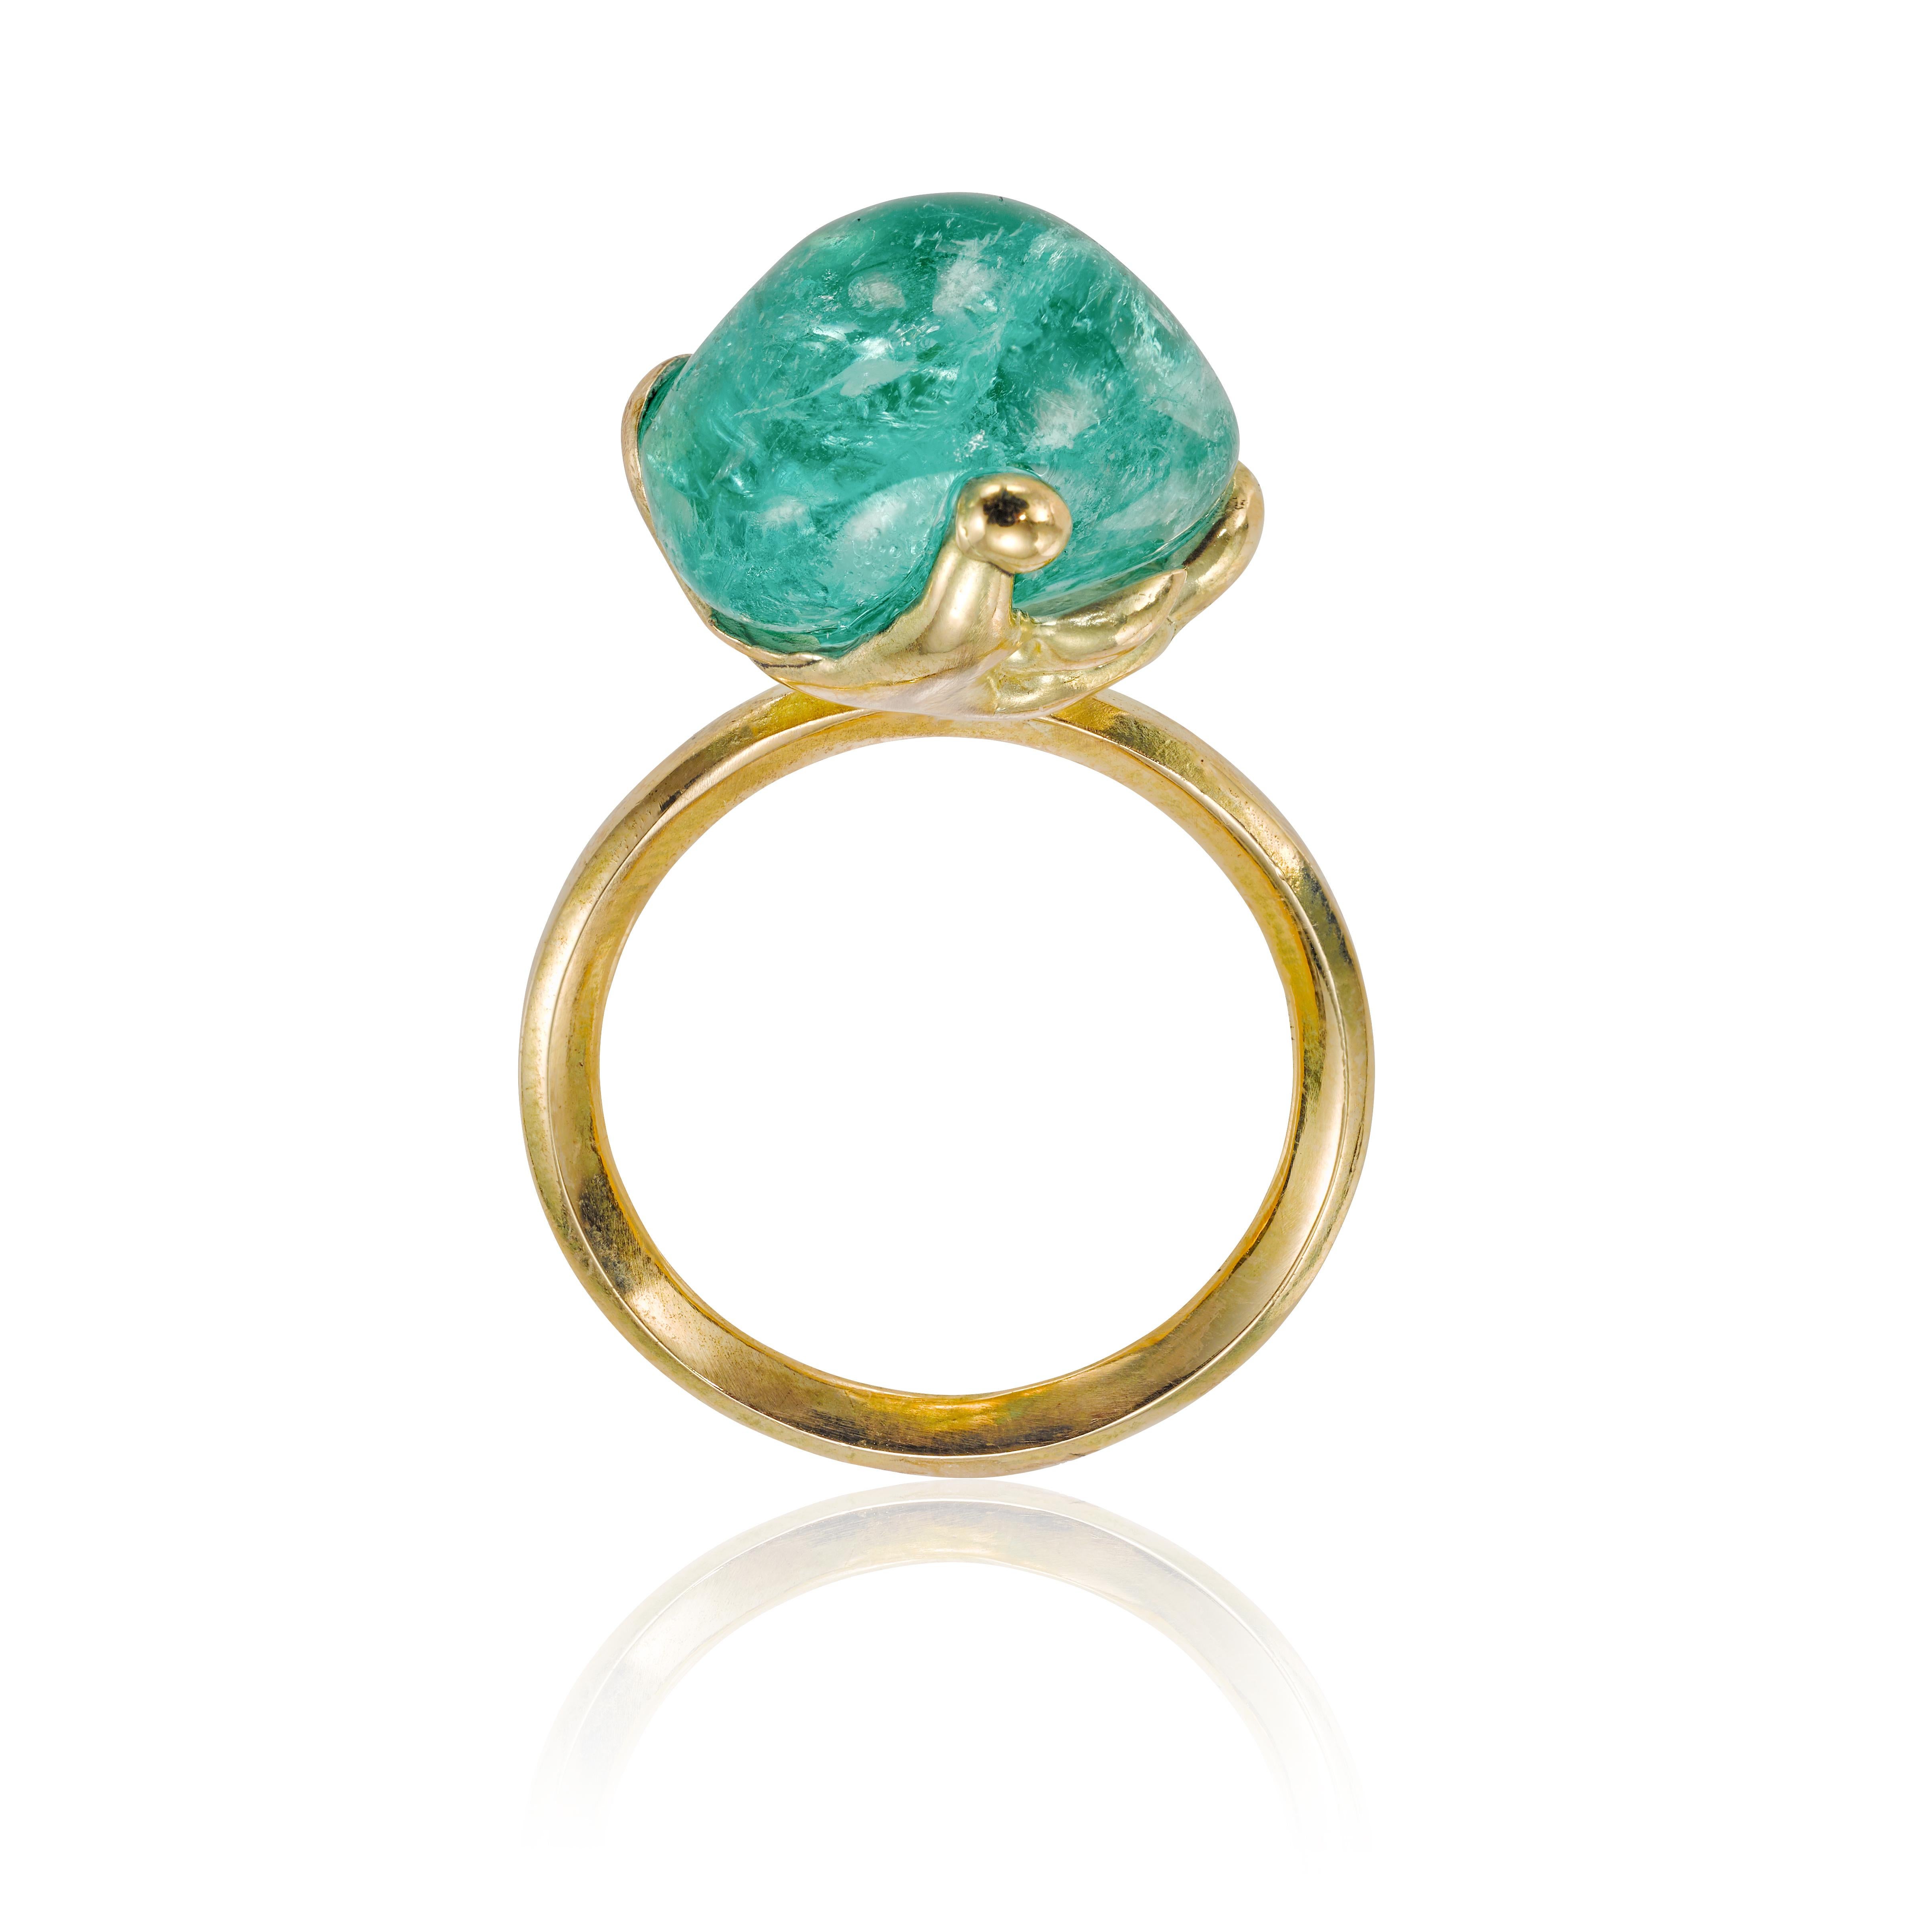 Measurements
Gemstone: 11.05 Carat Tumbled Muzo Emerald Colombia
Metal: 7.7g 18 Carat Recycled Yellow Gold
UK Ring size: M (US size approx 6 1/2)

The Rock Hound x Muzo Emerald Colombia
Molten MUZO Ring I

Molten MUZO celebrates the organic flowing